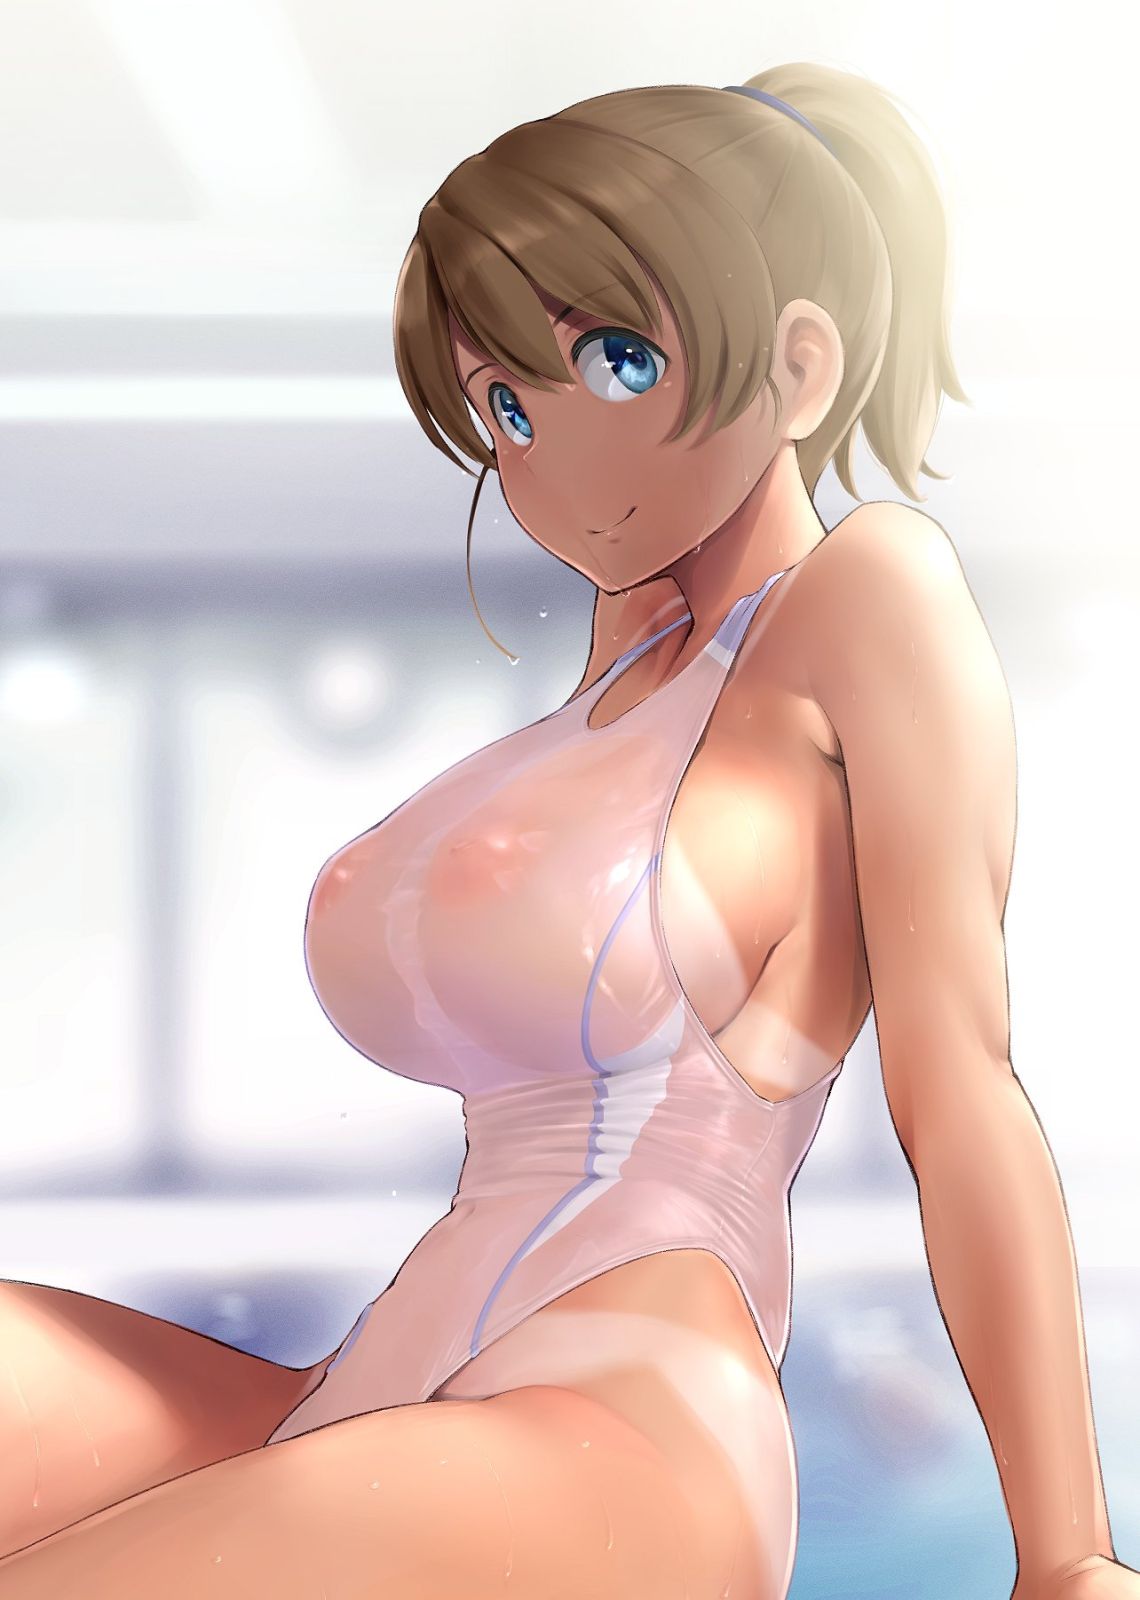 intrepid-in-a-transparent-competition-swimsuit-wa-washizutan-kancolle.jpg